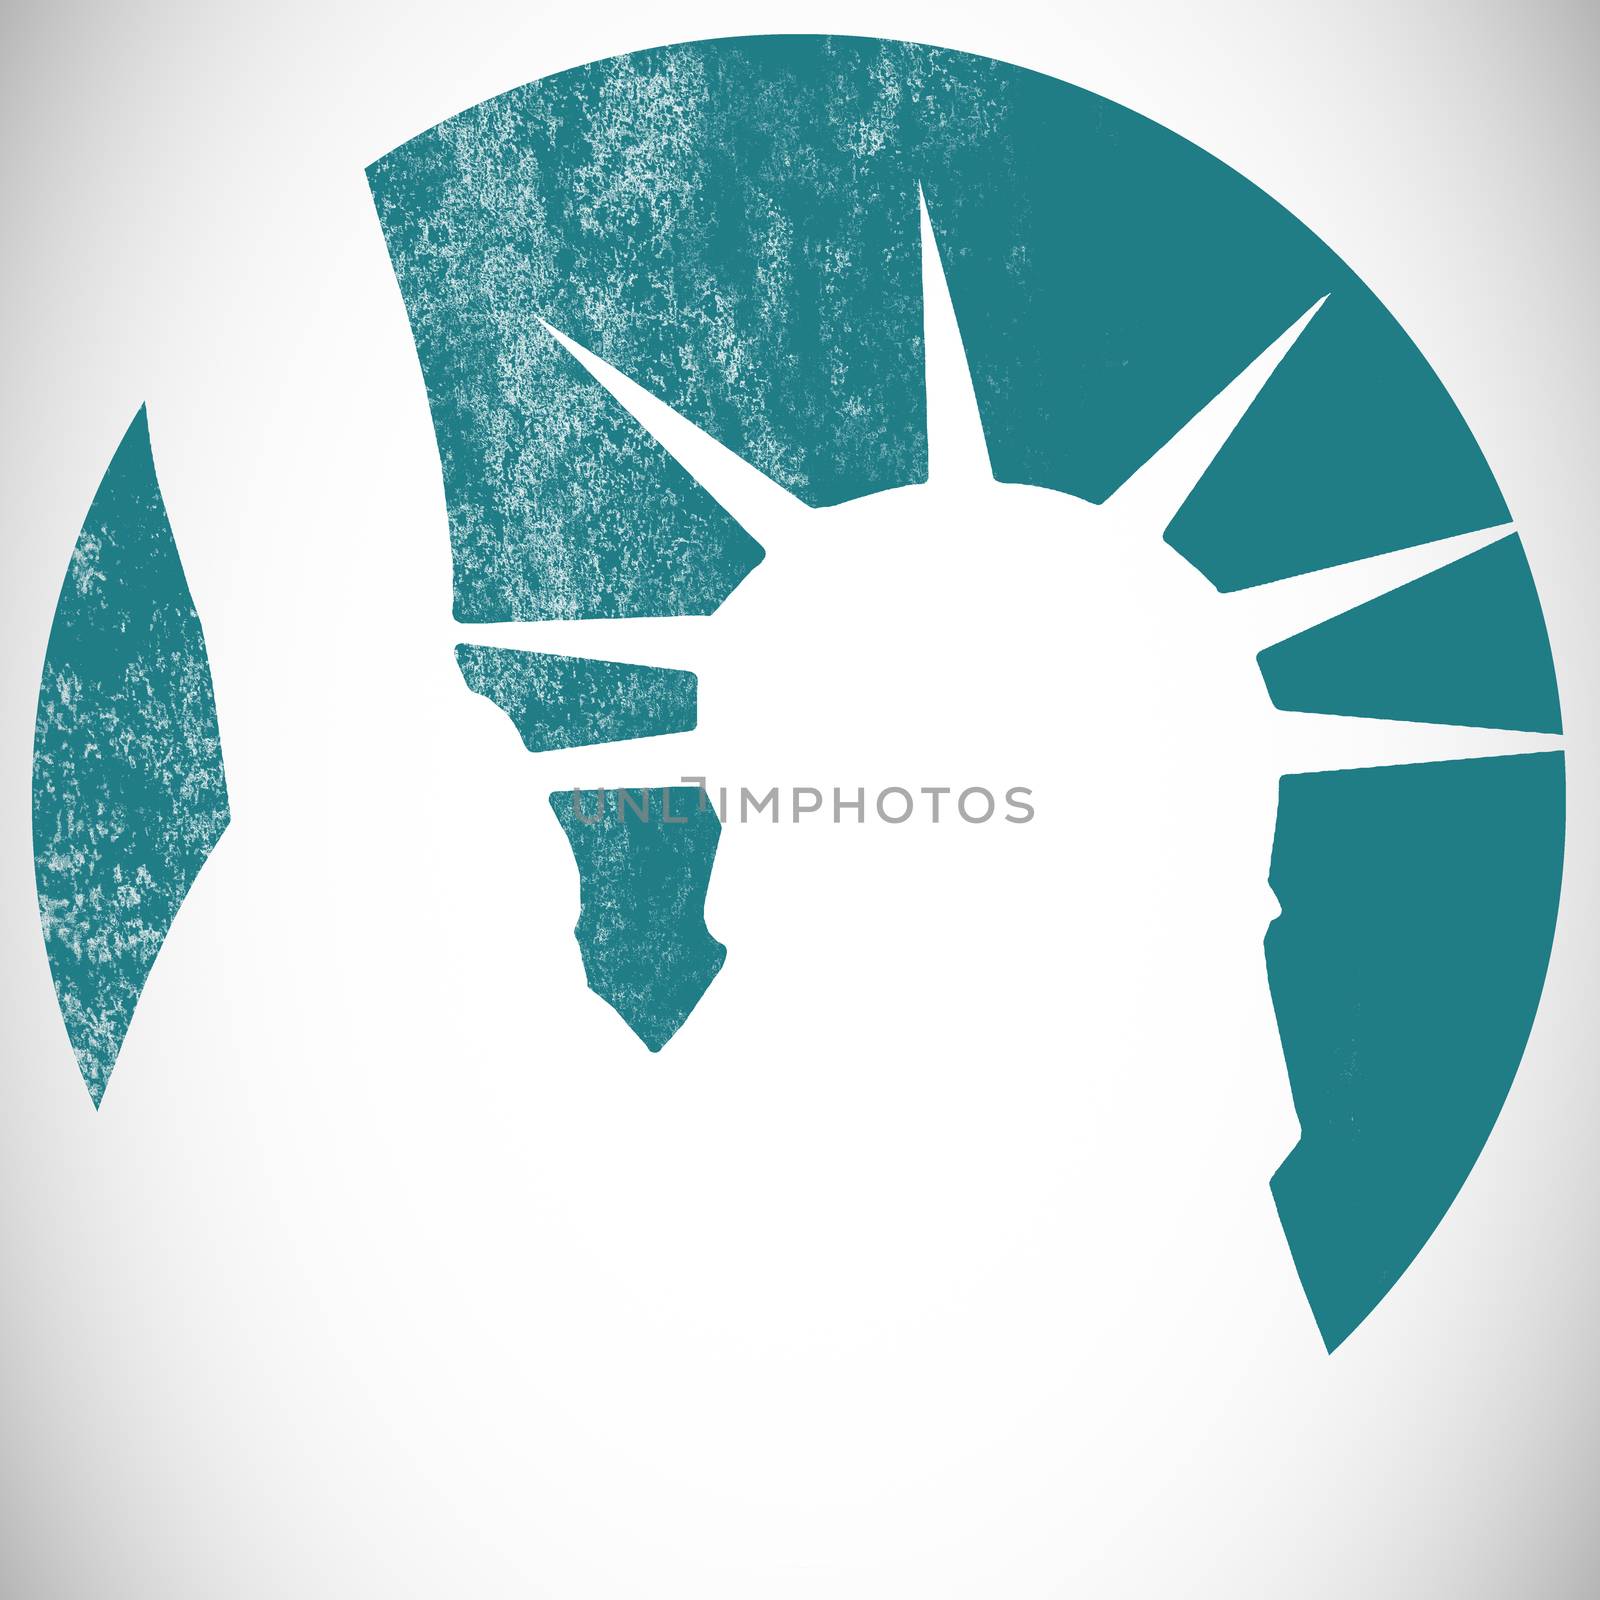 Graphic image of Statue of Liberty against white background